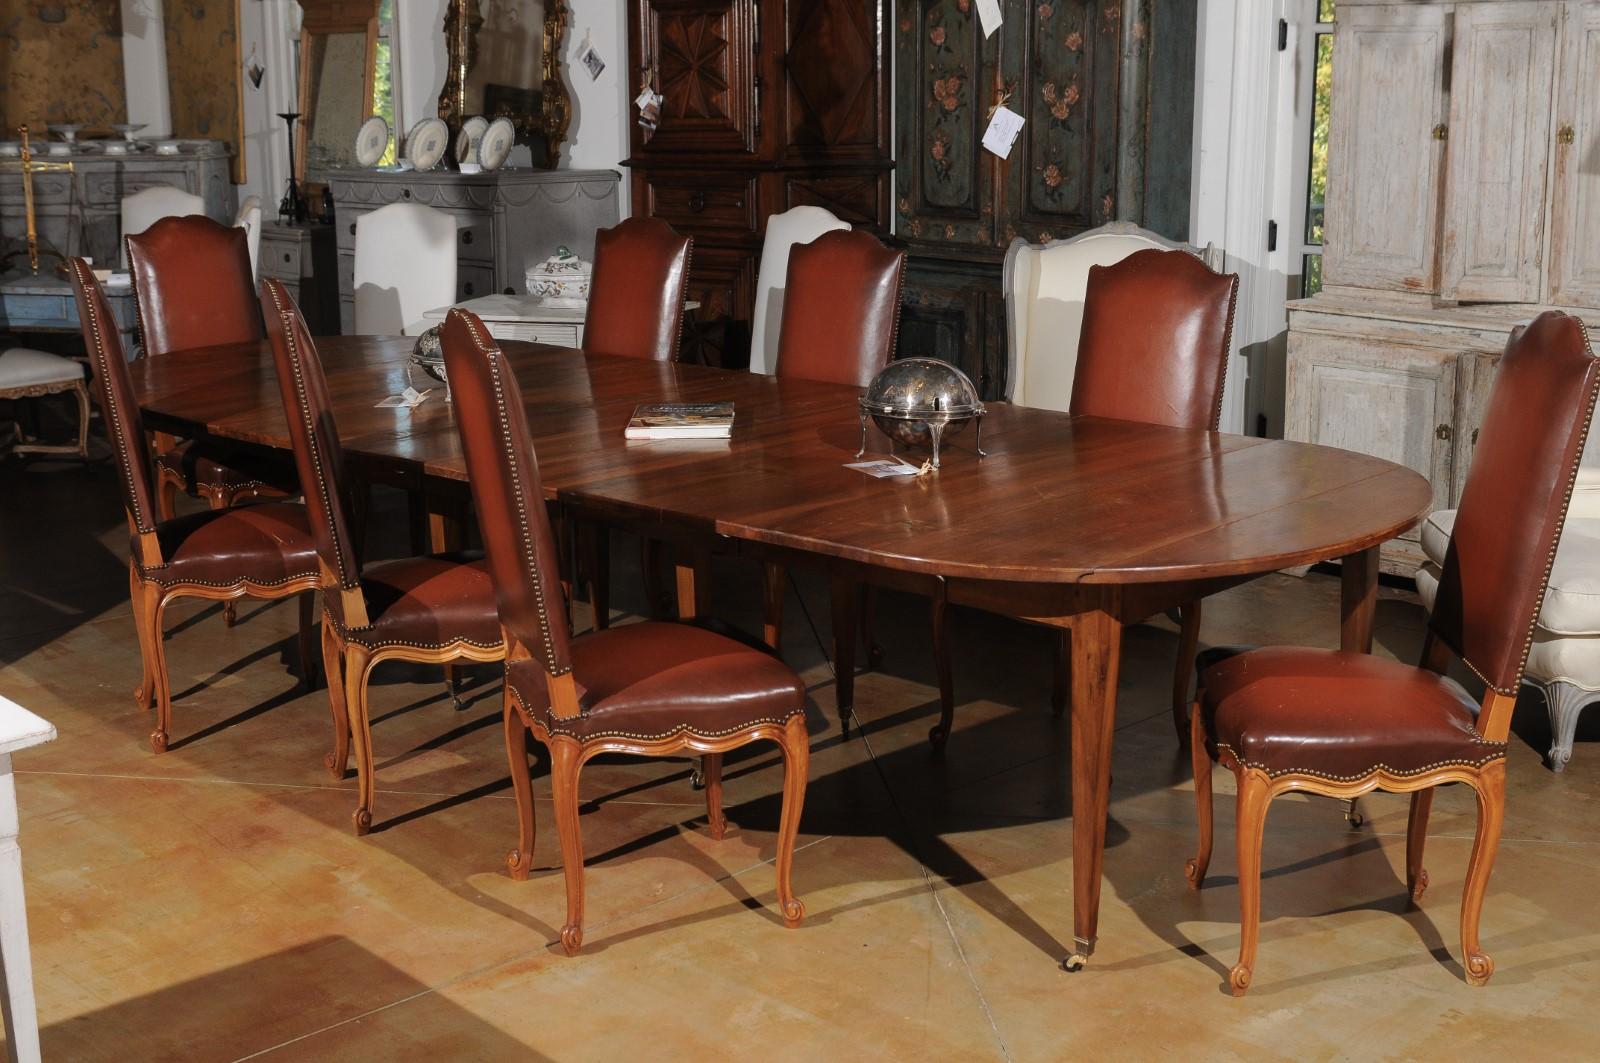 ON HOLD A French walnut oval extension dining room table from the 19th century, with five leaves, tapered legs and casters. Created in France during the 19th century, this French dining room table features a walnut oval top showcasing lateral drop